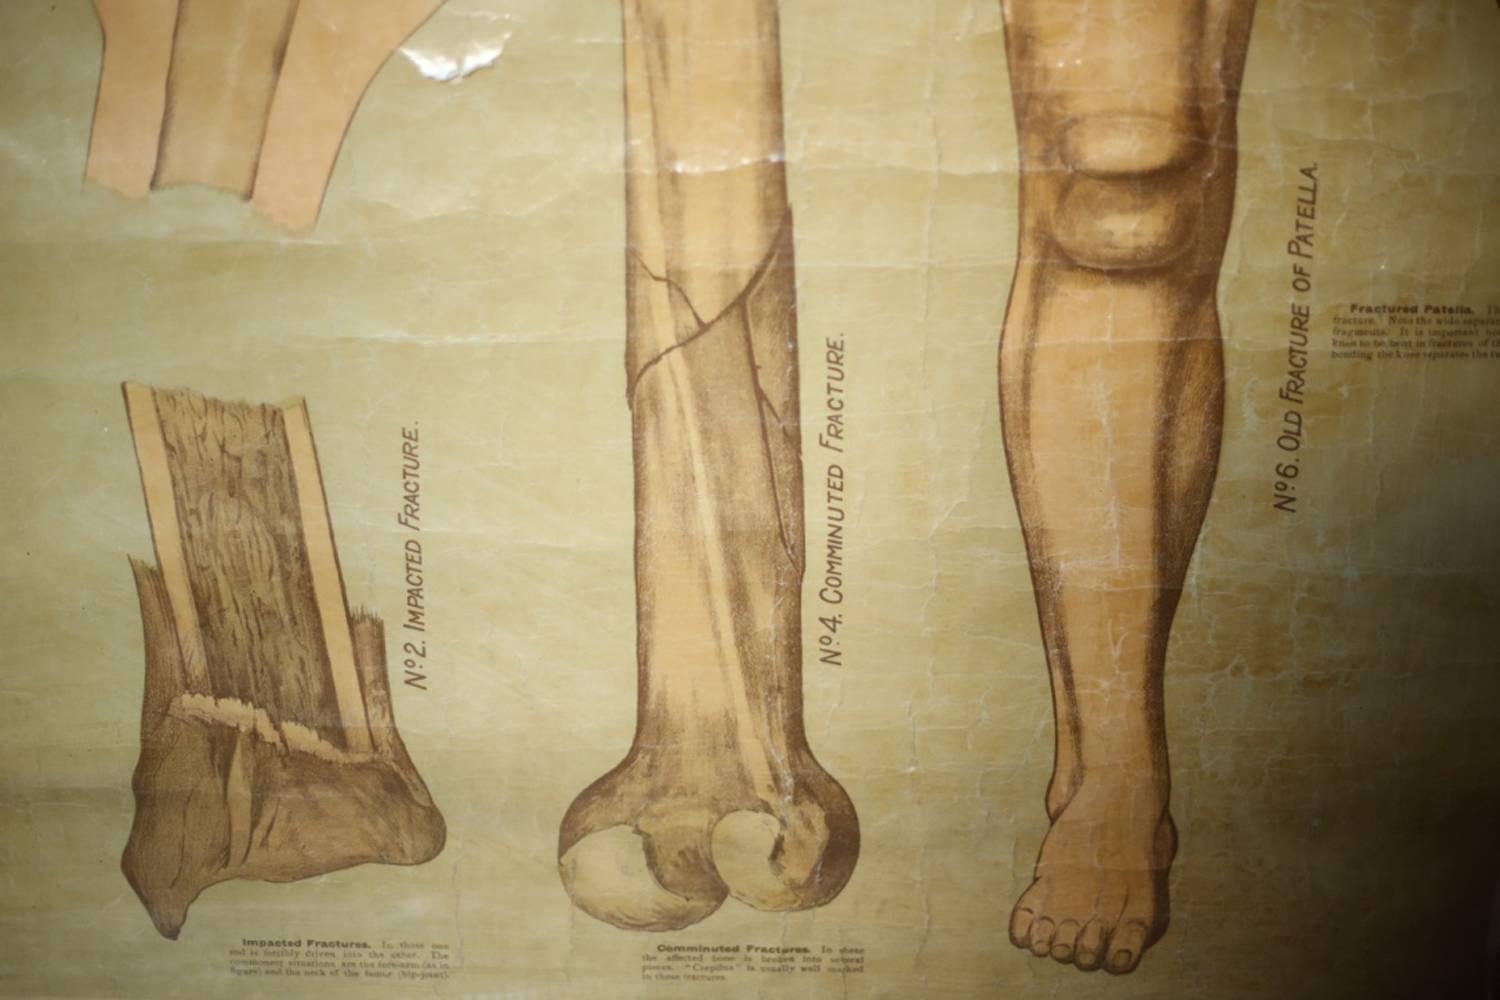 Edwardian Medical Poster of Fractures and Dislocations, Chemist Science 4